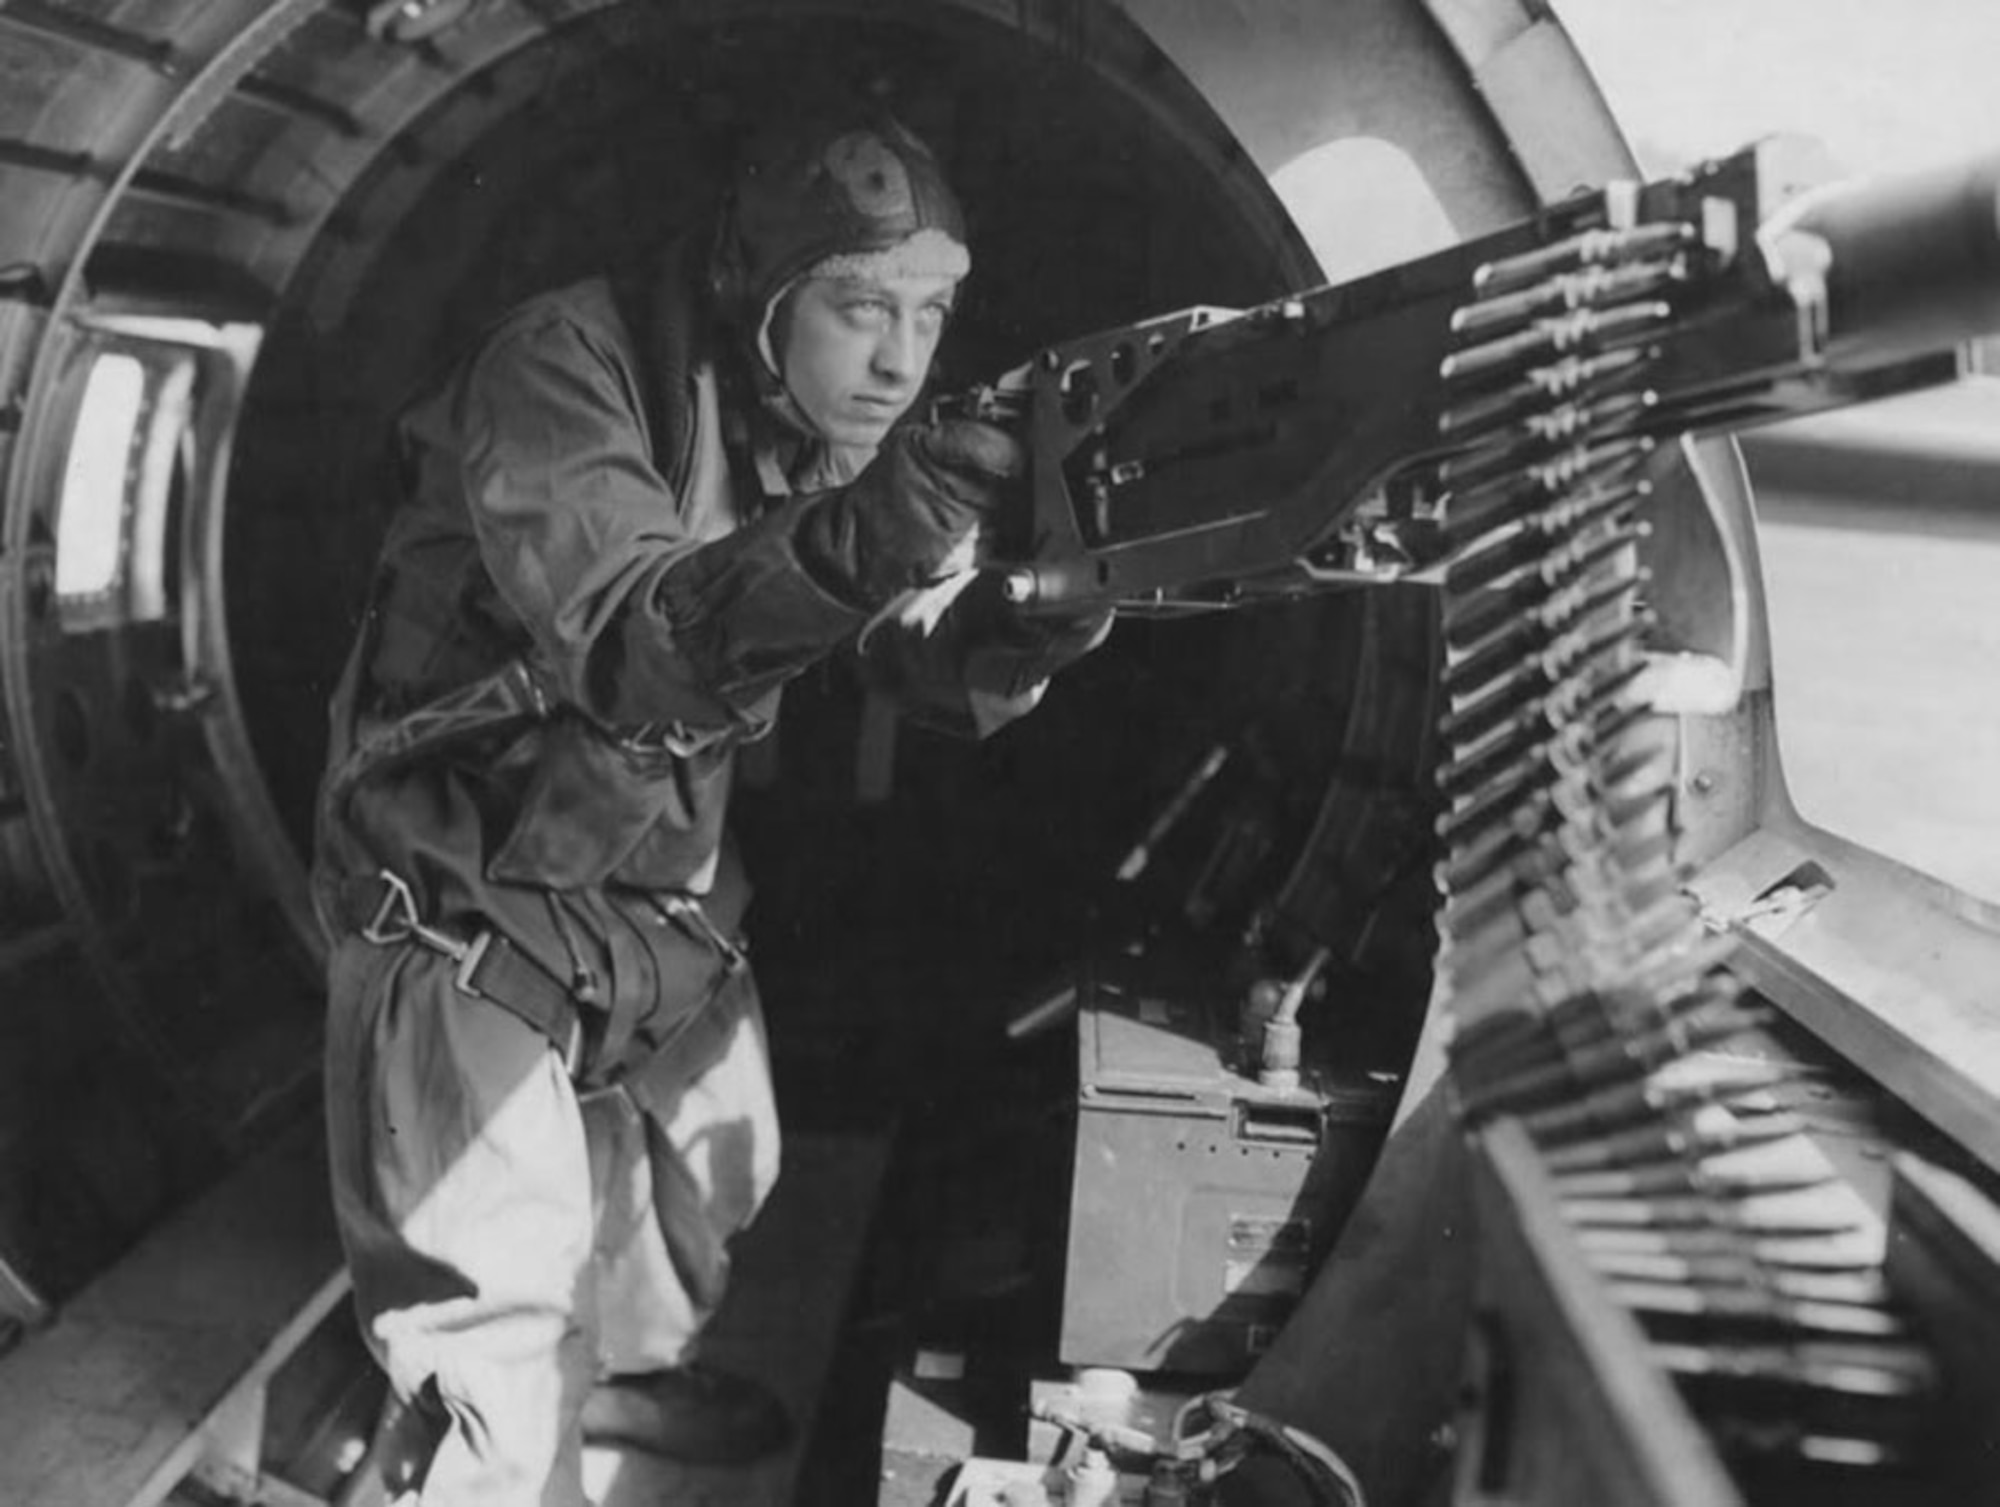 Maynard Smith, above, chose to be an aerial gunner because it was the quickest way to make rank. (U.S. Air Force file photo)